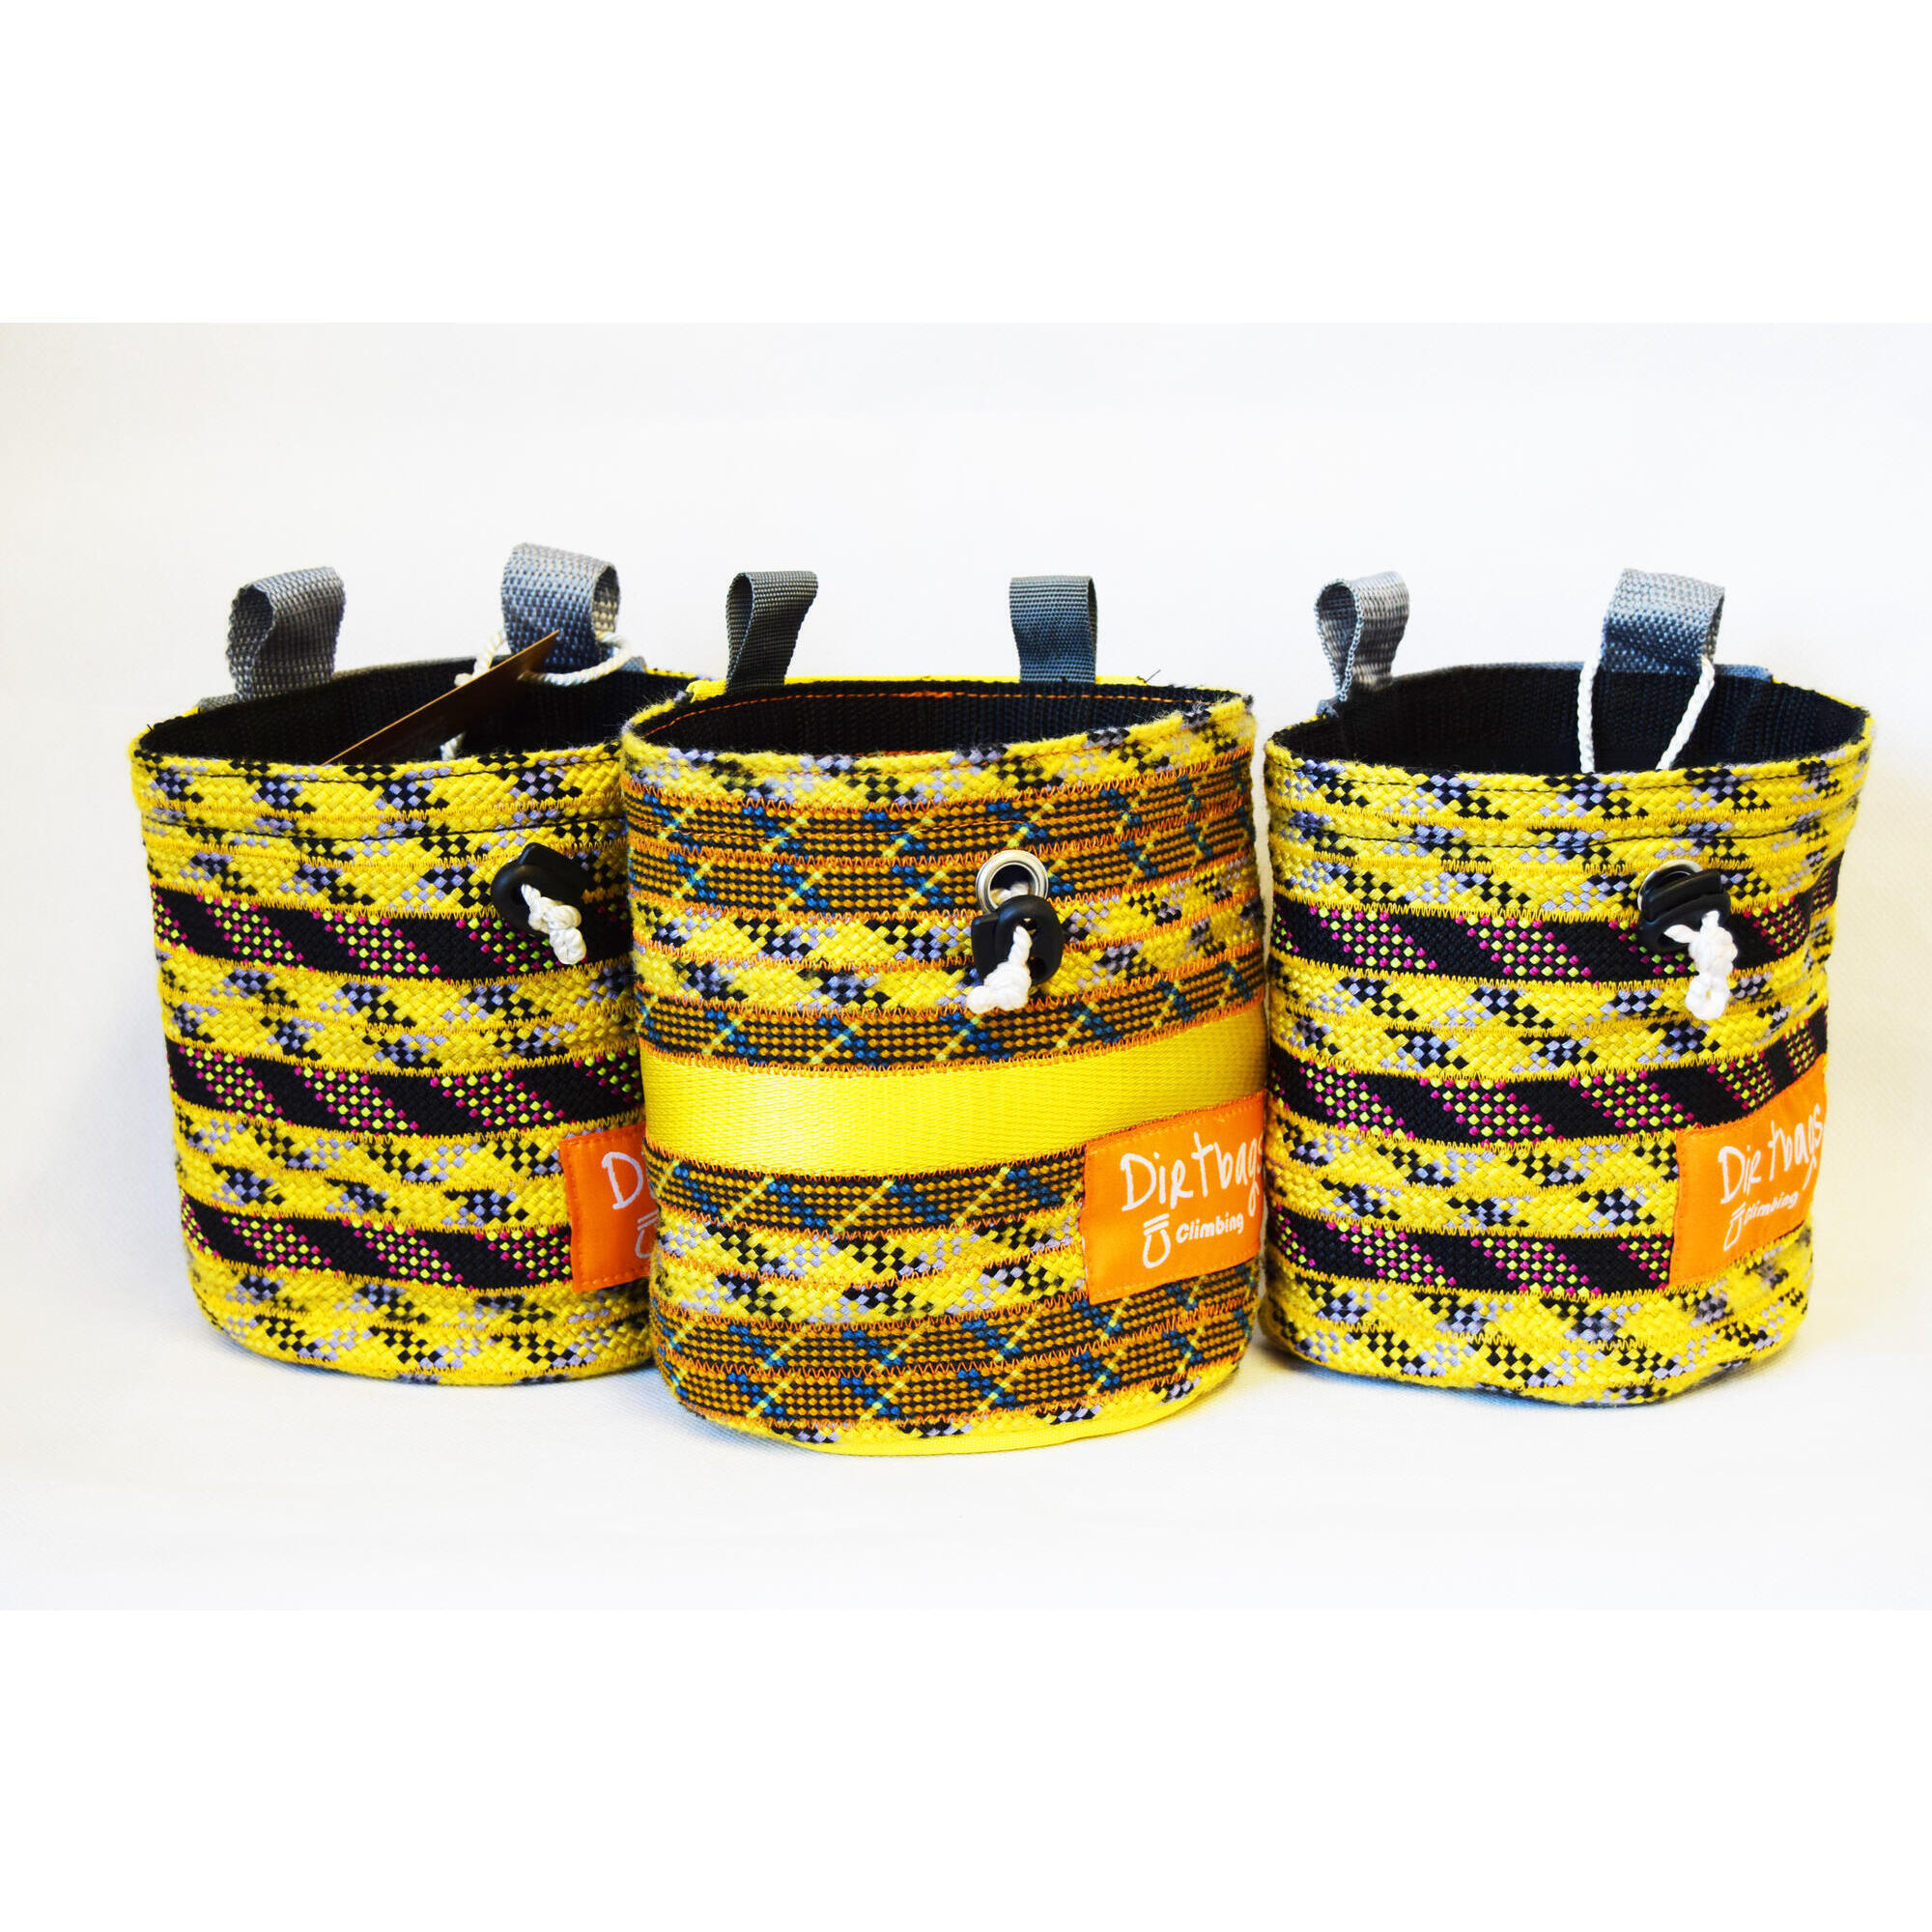 DIRTBAGS CLIMBING Recycled climbing rope chalk bag, made in the UK / Yellow